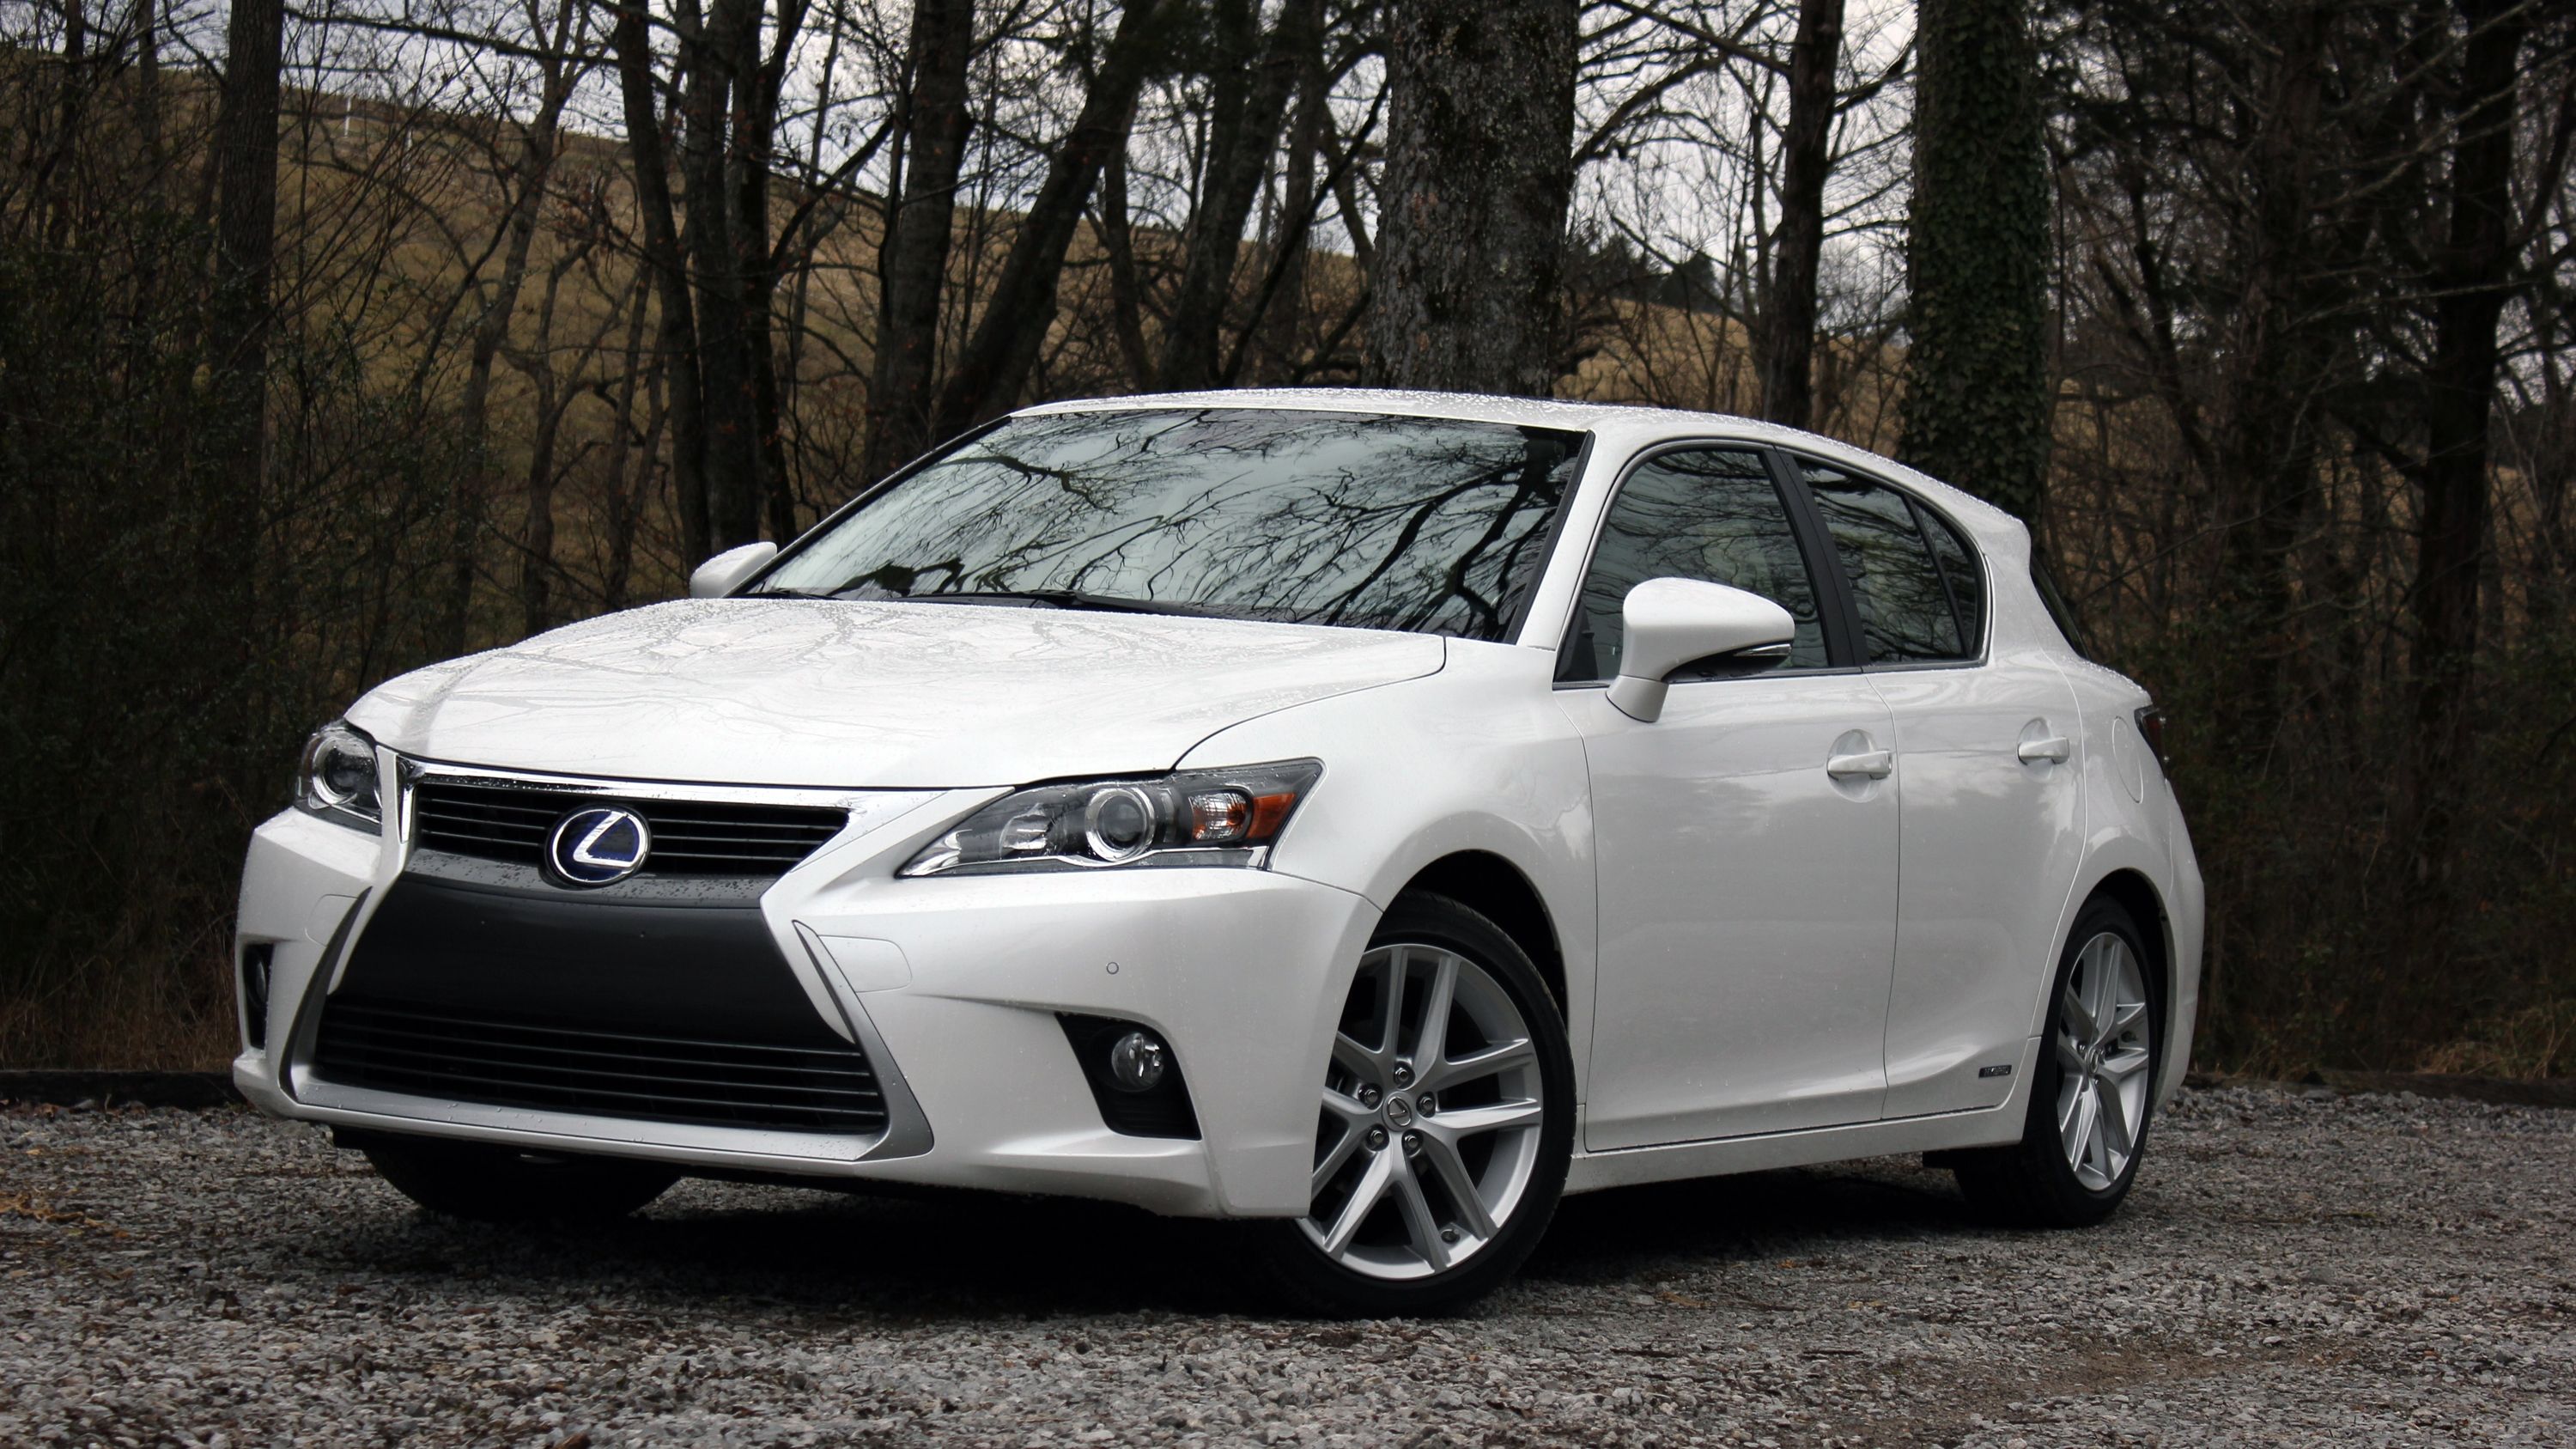  Cristian Moe spent a week with the Lexus CT 200h, check out his review at TopSpeed.com.